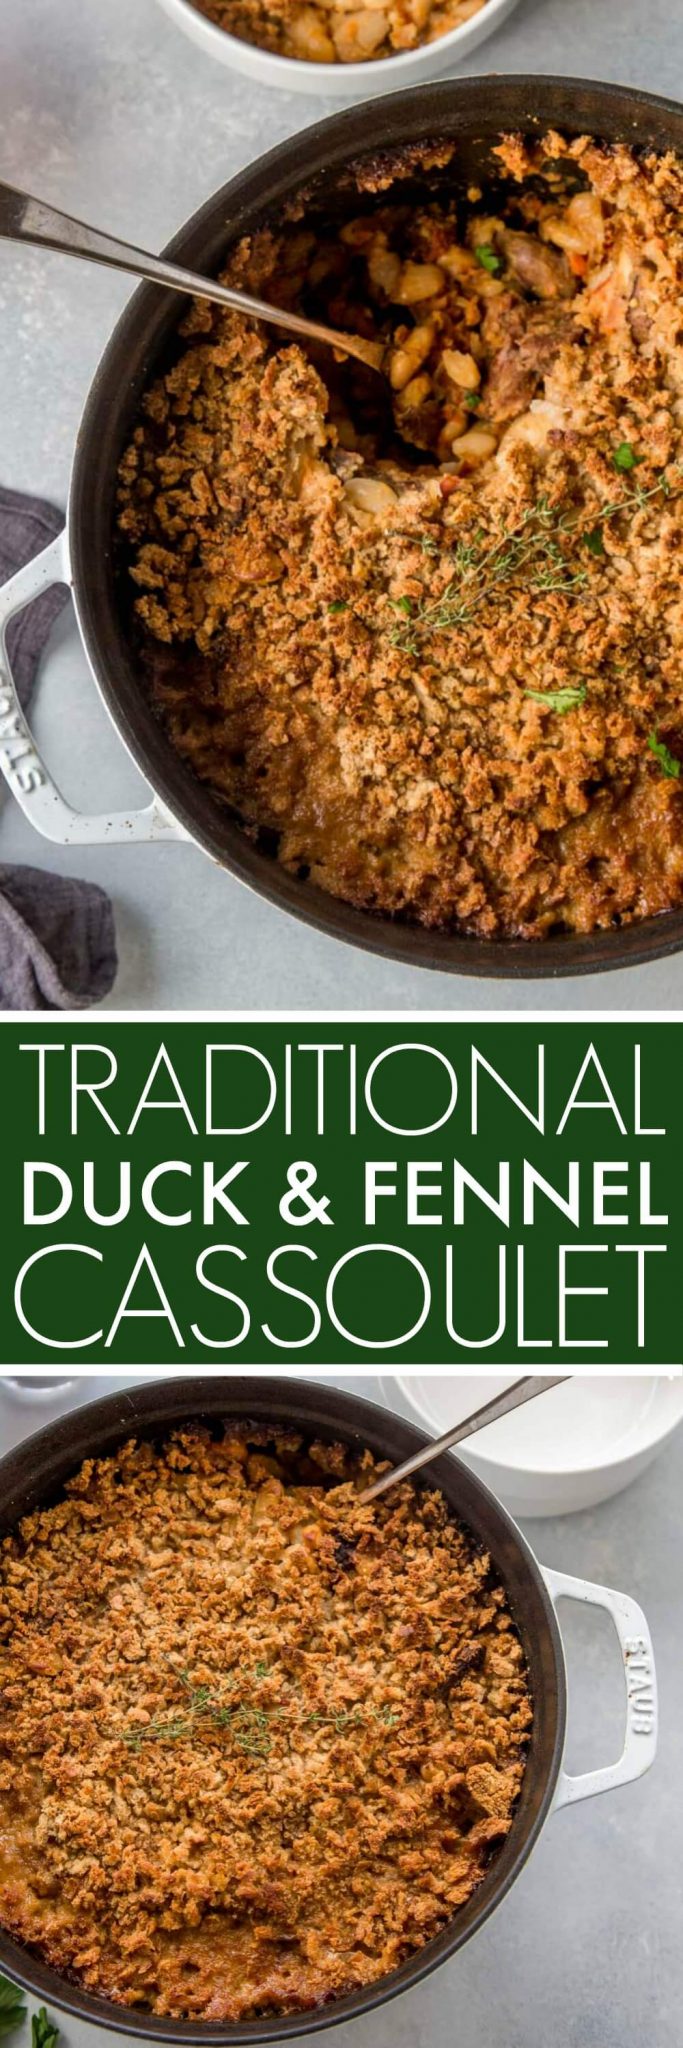 Duck & Fennel Cassoulet is the perfect comfort food for chilly winter days!